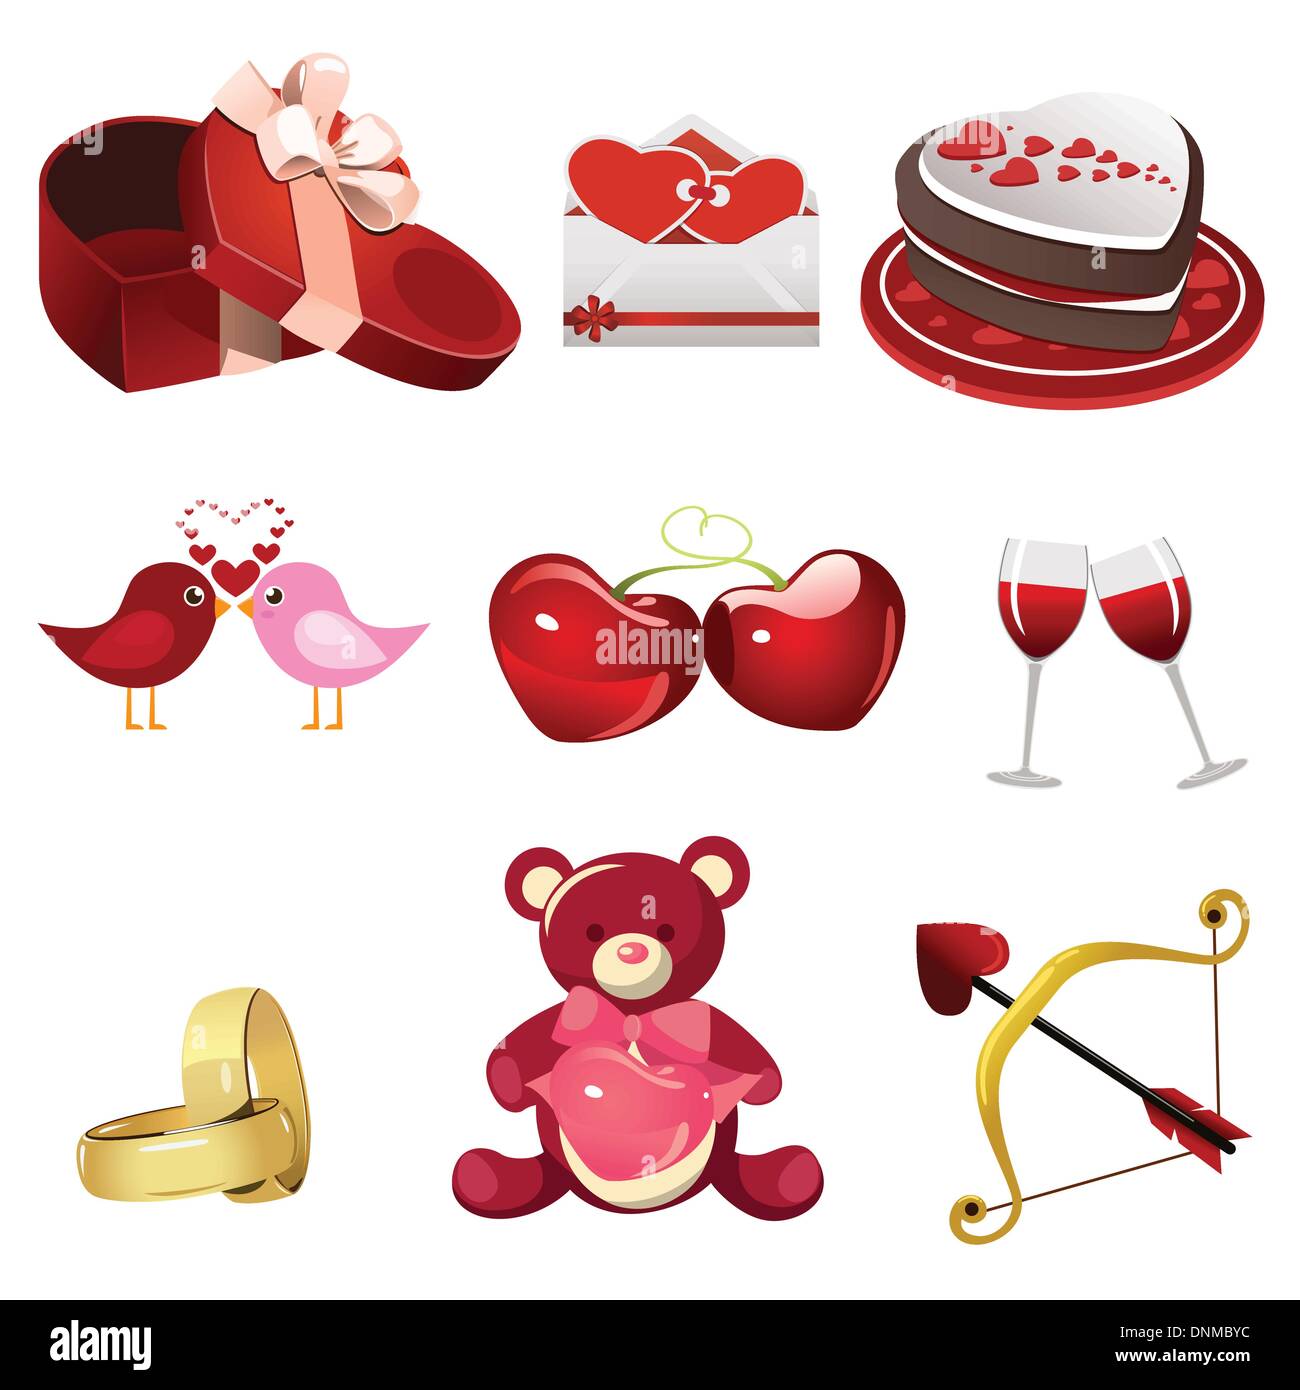 A vector illustration of valentine icon sets Stock Vector